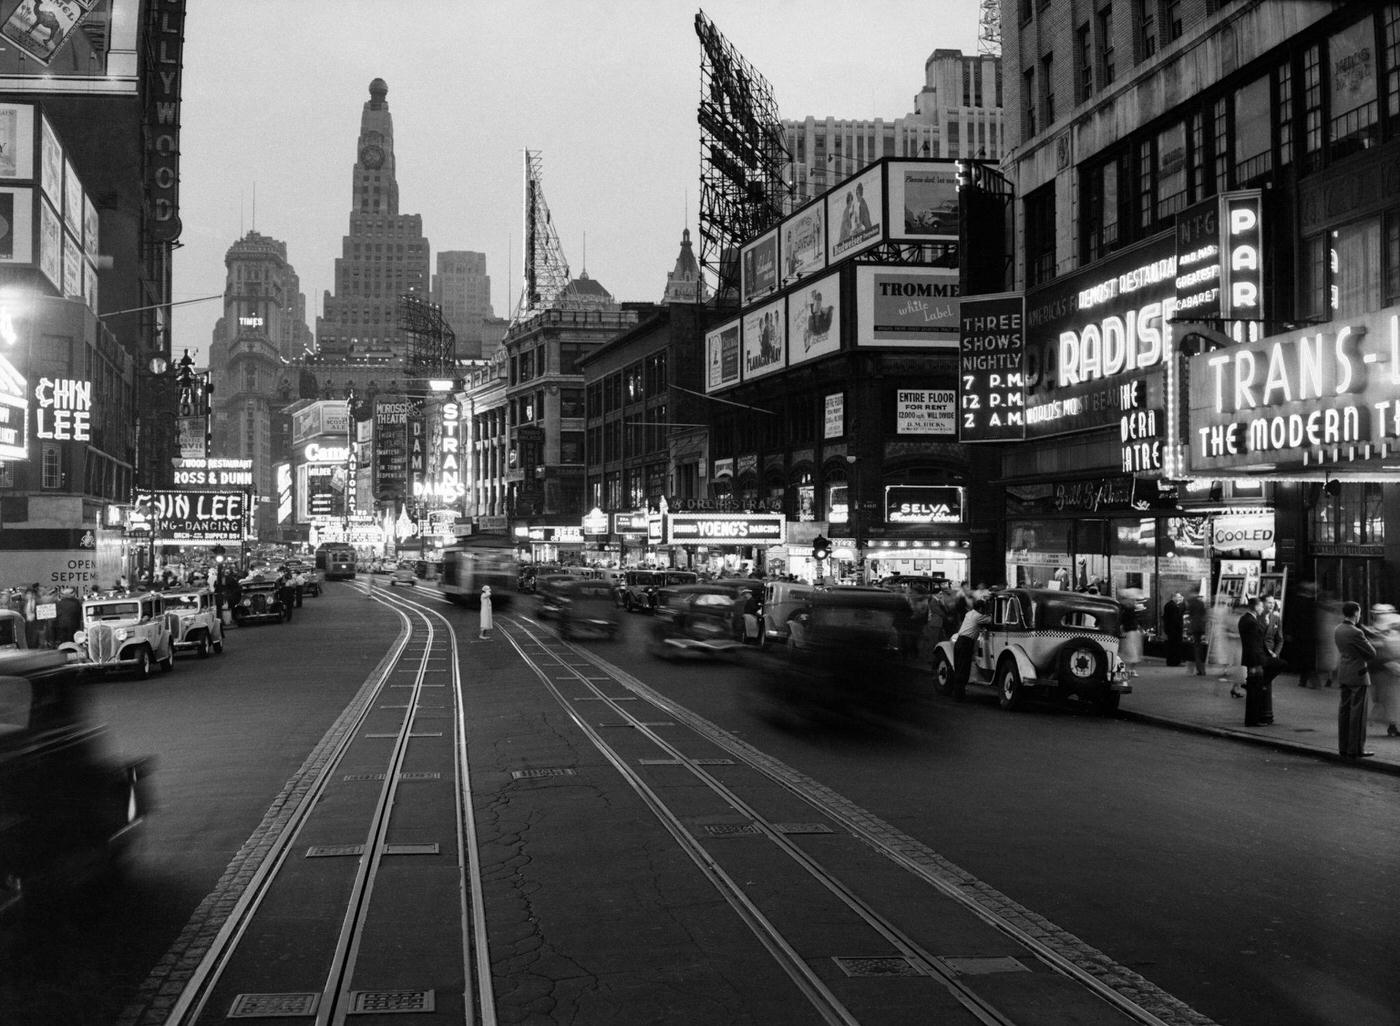 Night Street Scene On Broadway Looking South To Times Square, Manhattan, 1934